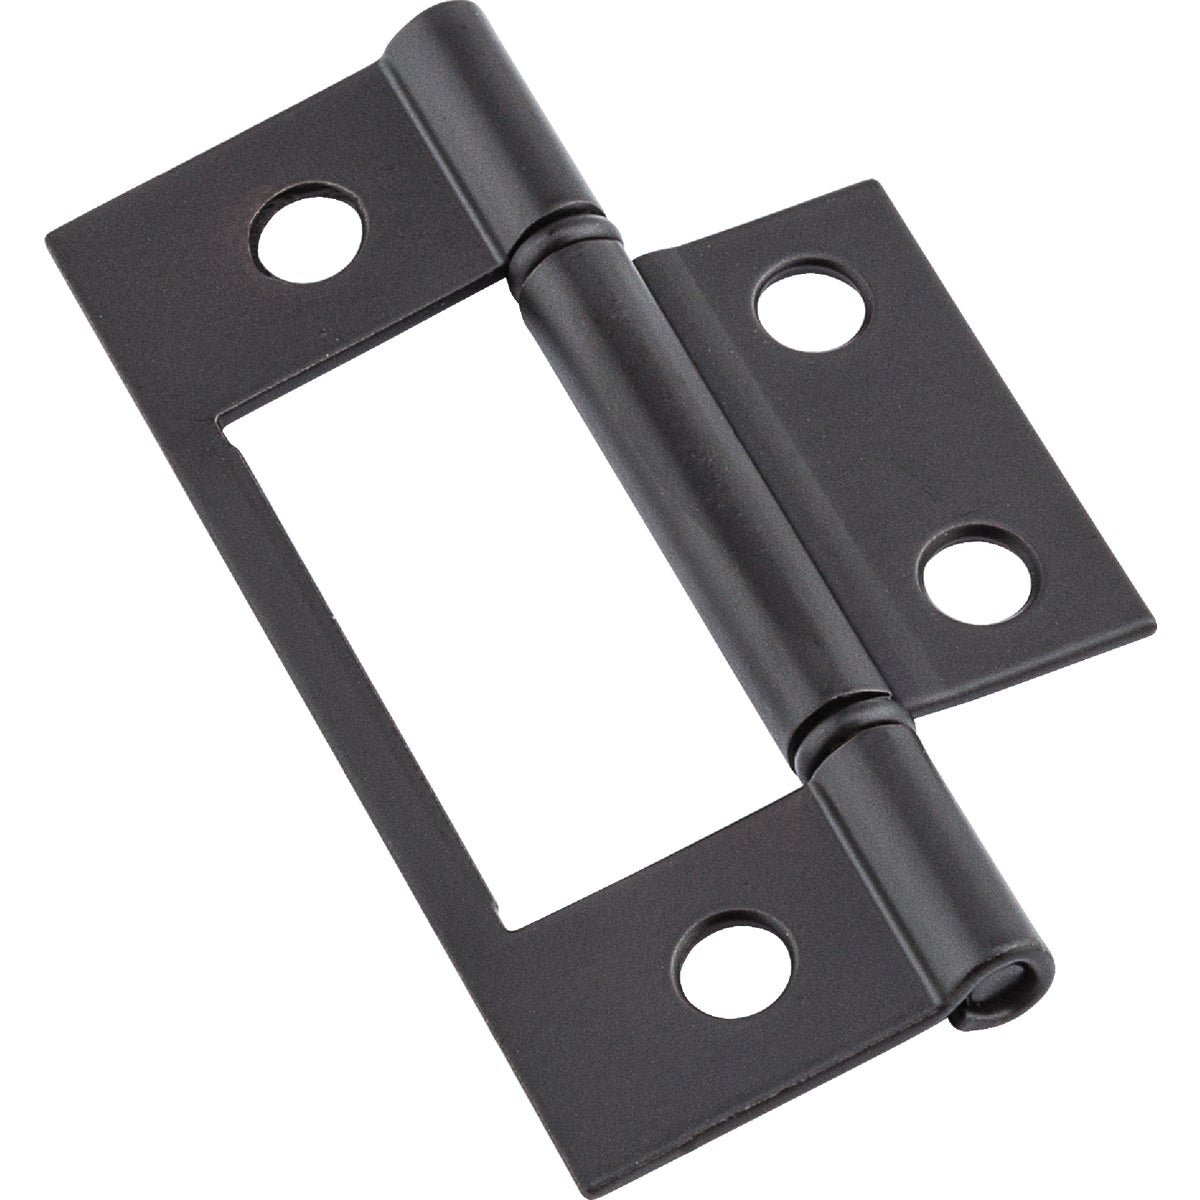 National Non-Removable Pin Surface Mount Oil Rubbed Bronze Bi-Fold Door Hinge